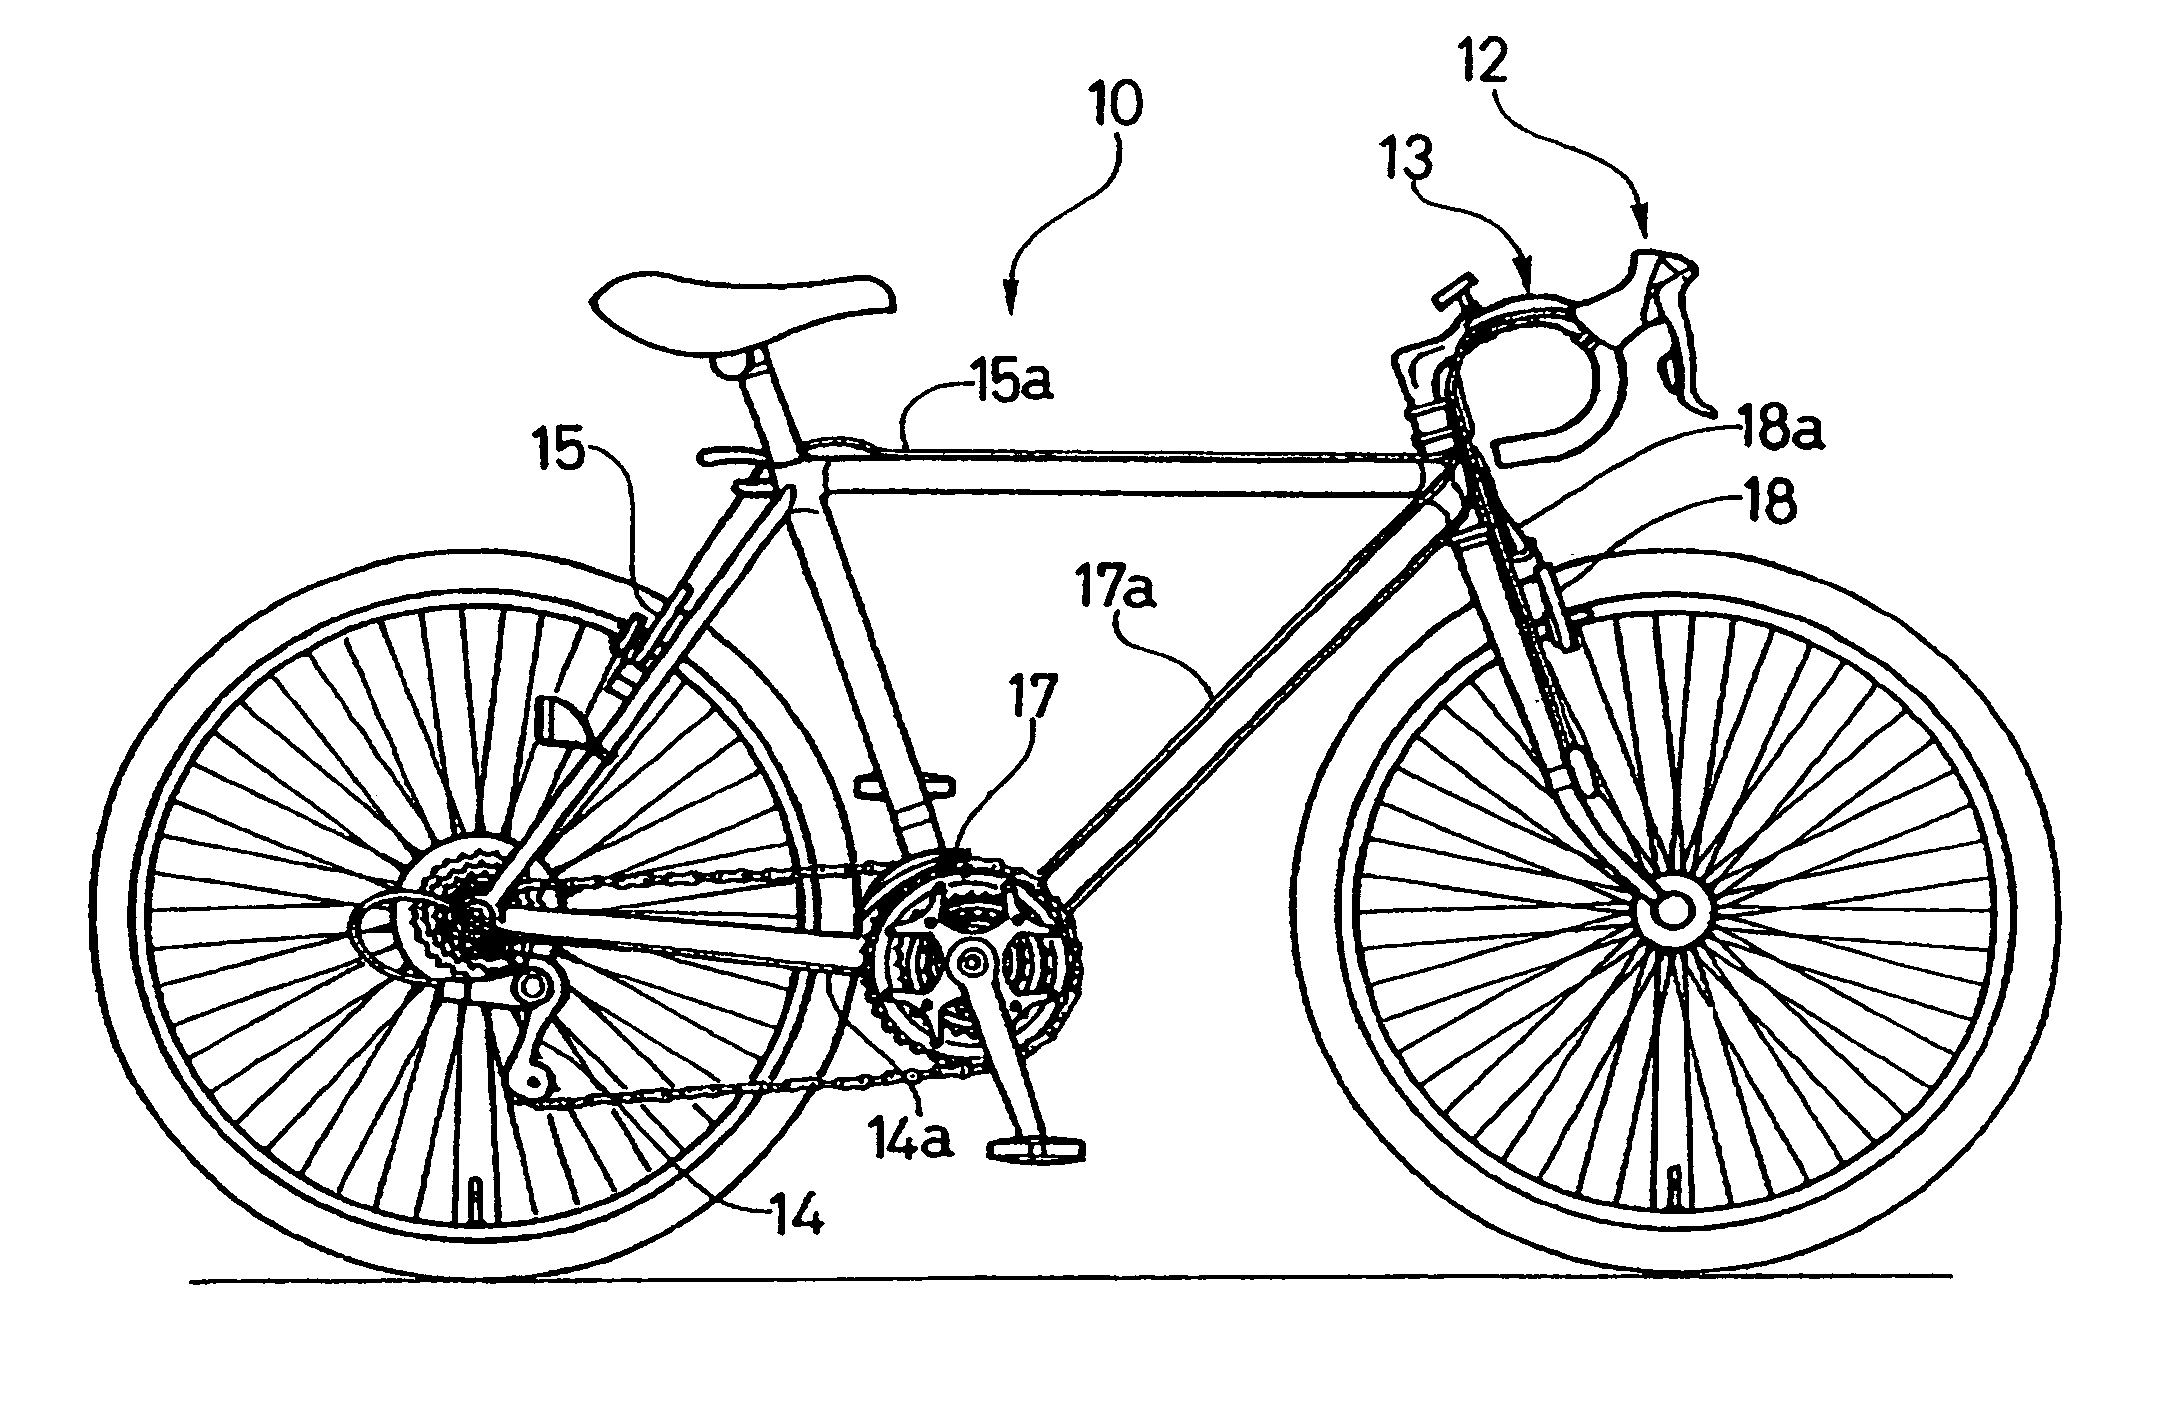 Bicycle control device